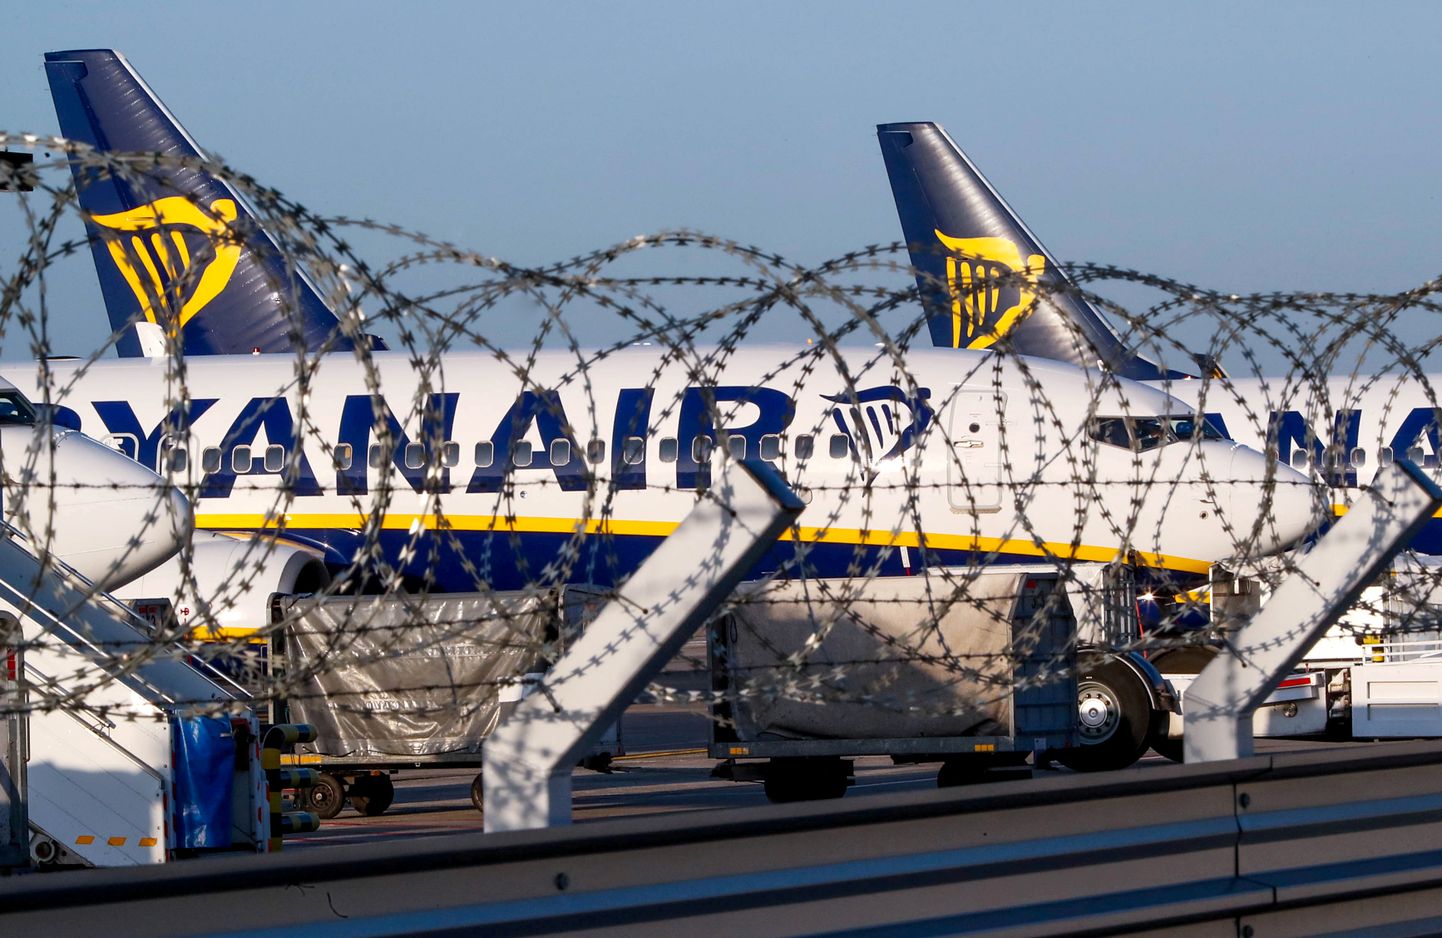 FILE PHOTO: Ryanair aircraft are parked on the tarmac during a wider European strike at the airline to protest slow progress in negotiating a collective labour agreement, at Brussels South Charleroi Airport, Belgium August 10, 2018.  REUTERS/Yves Herman/File Photo